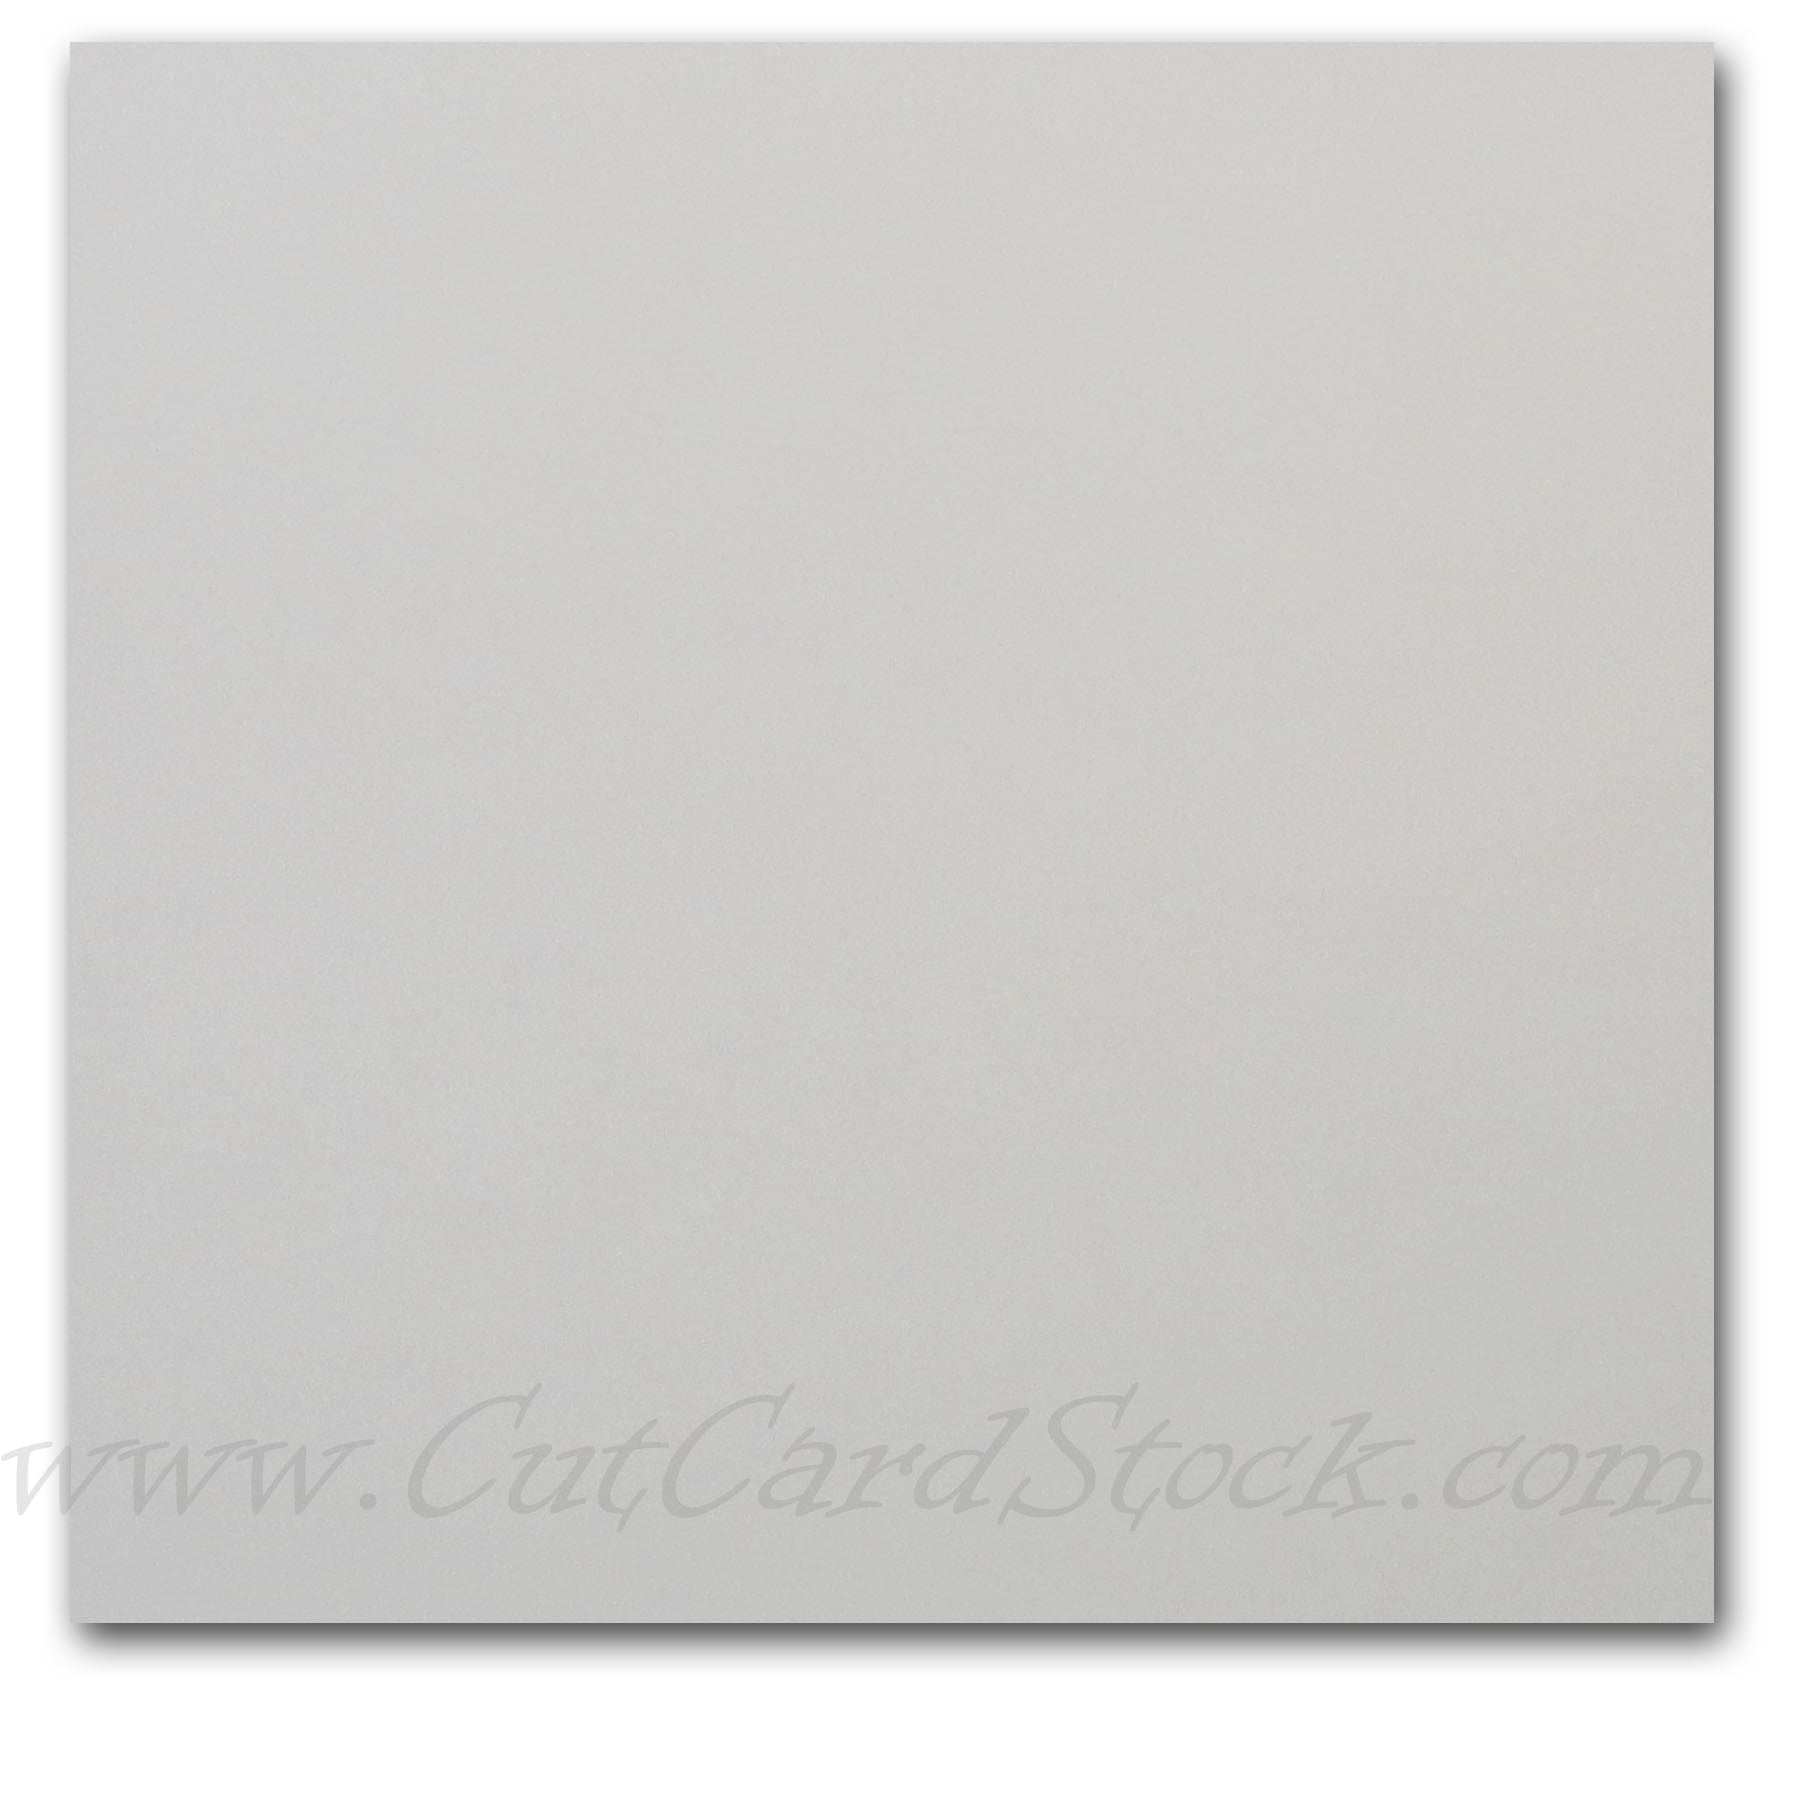 Basic WHITE (Lightweight) Card Stock Paper - 8.5 x 11 - 65lb Cover (176gsm)